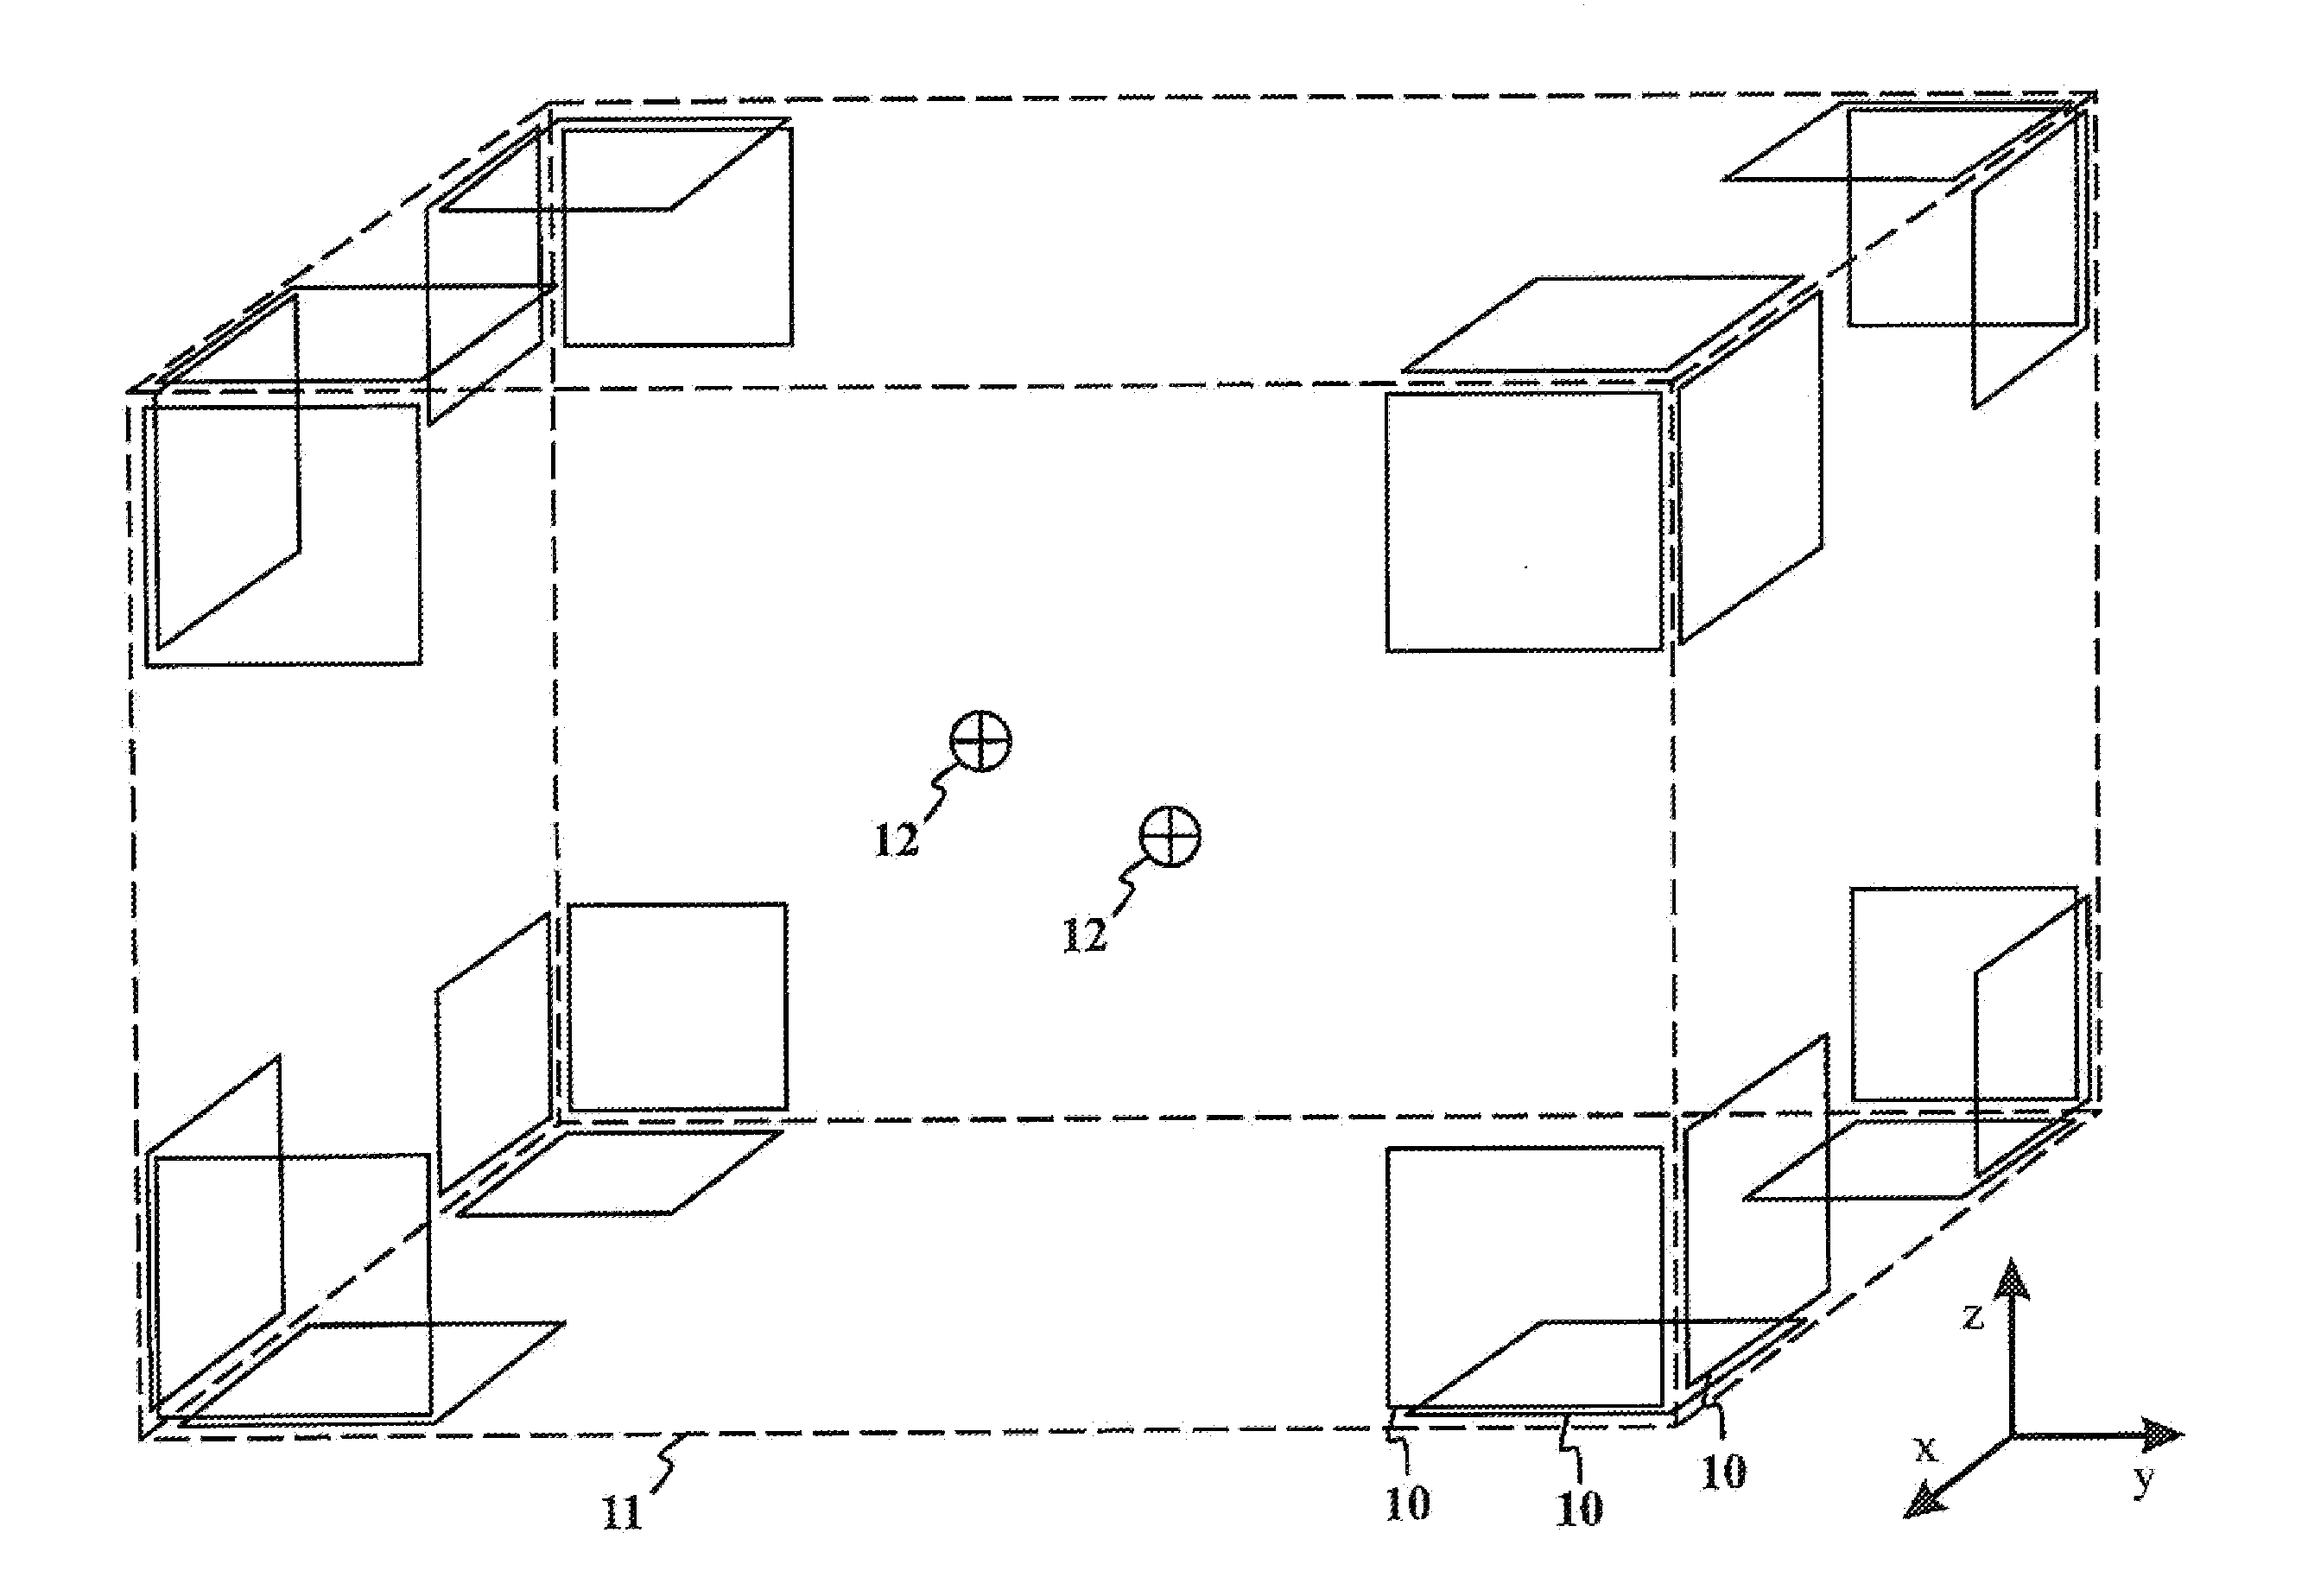 Method for designing coil systems for generation of magnetic fields of desired geometry, a magnetic resonance imaging or magnetoencephalography apparatus with a coil assembly and a computer program